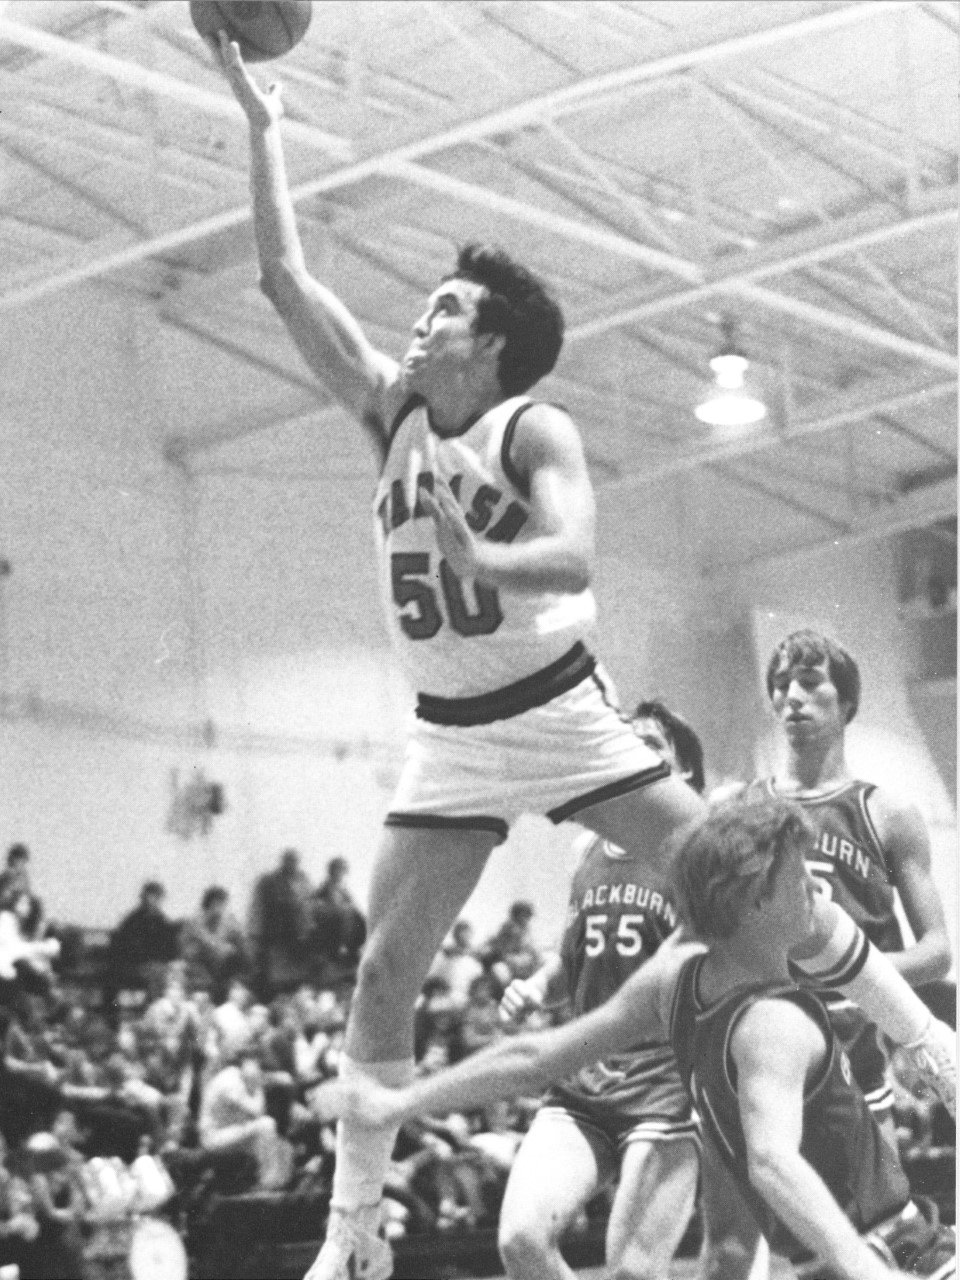 Merlin Nice was key contributor to Wabash's 1982 National Championship team and a well beloved figure in the Little Giant community.